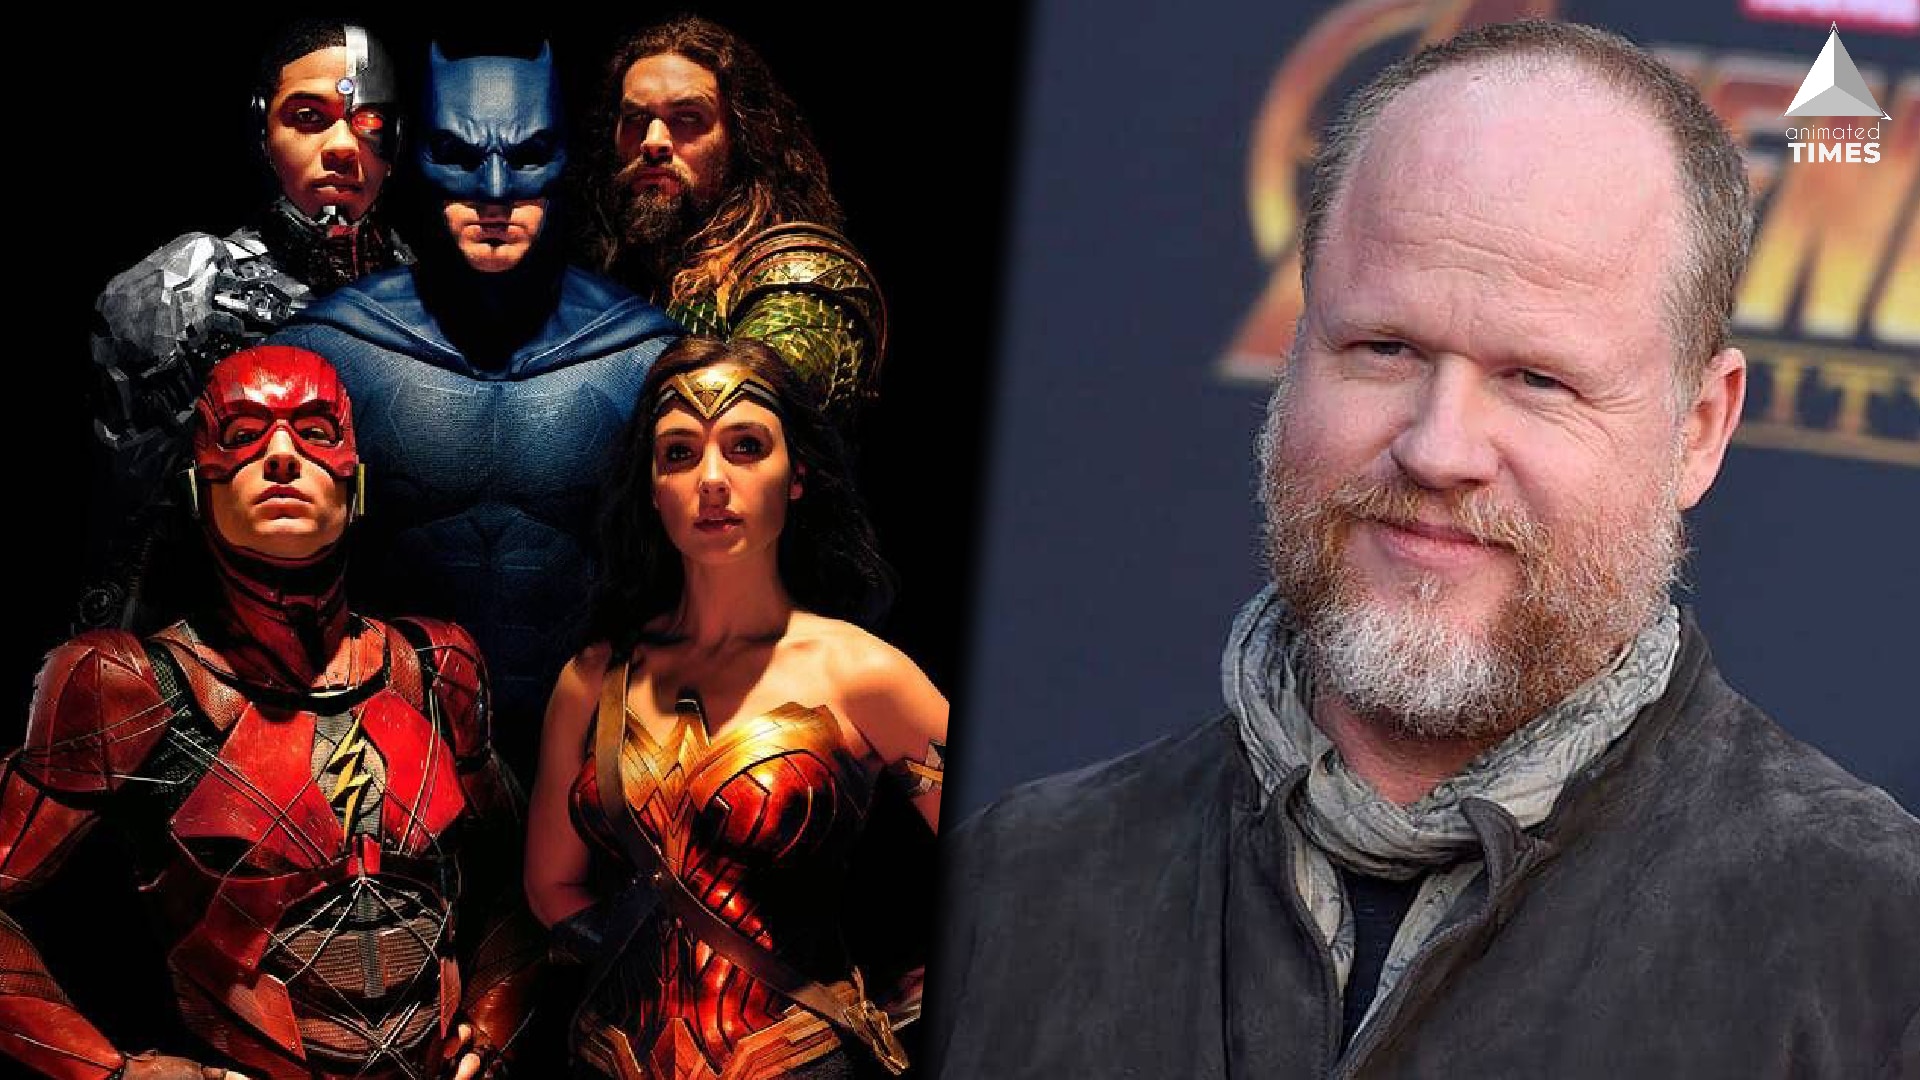 Joss Whedon’s Plan For Justice League 2 Revealed